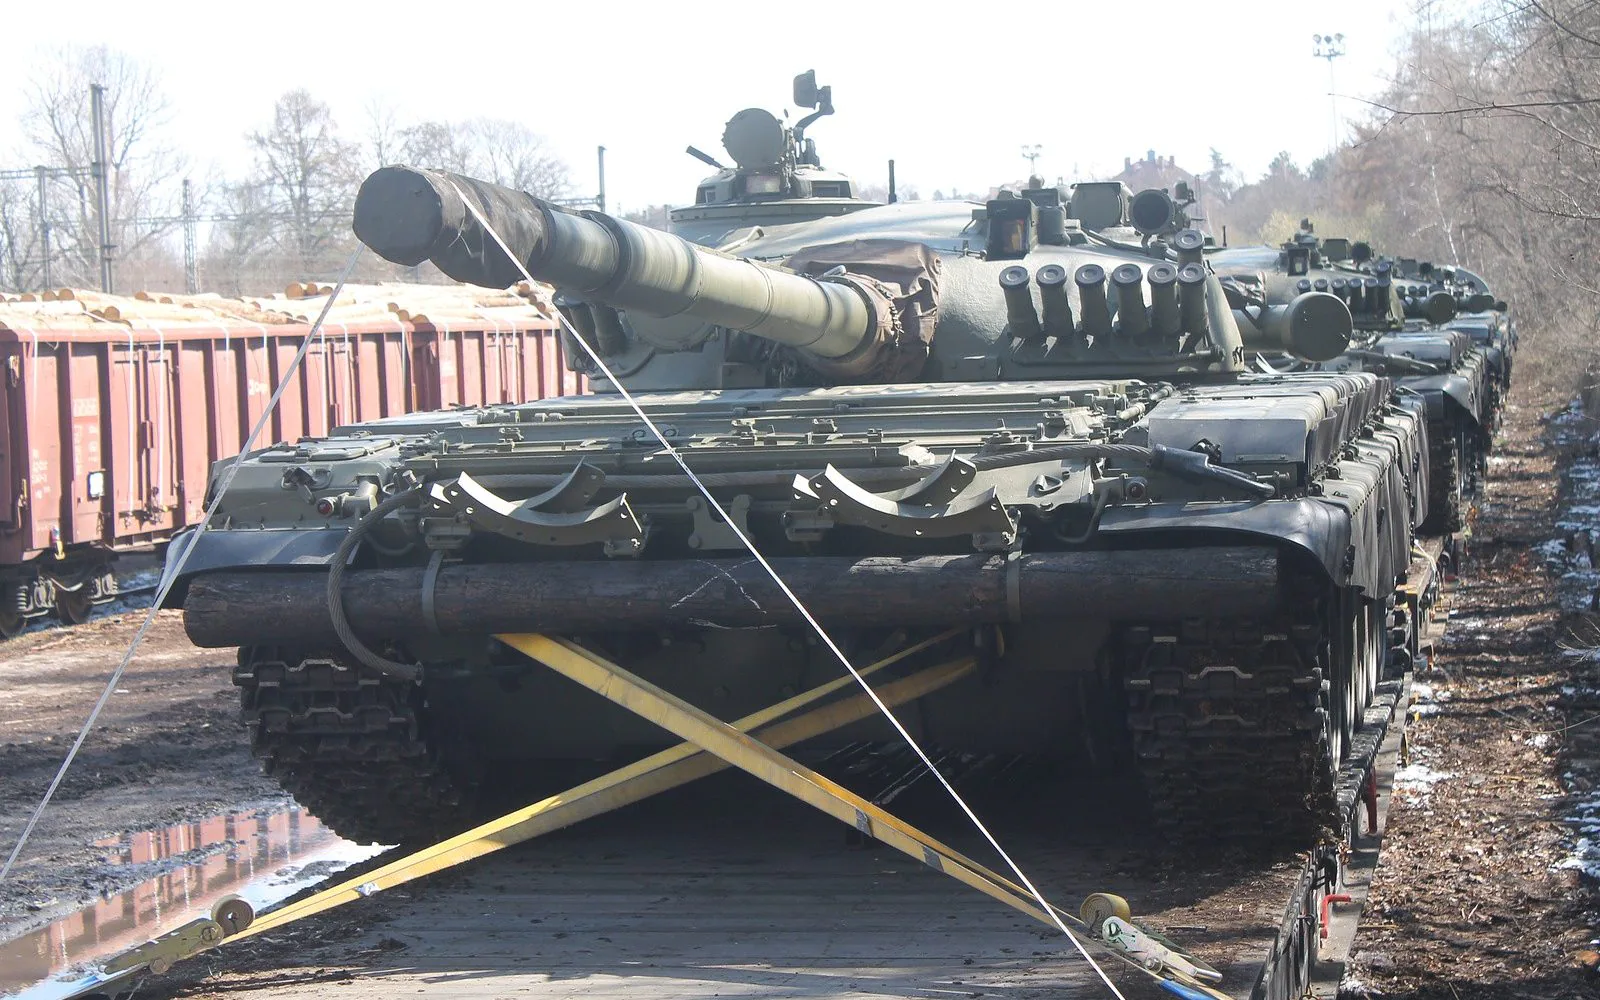 Ukraine has received more than 230 Warsaw Pact-designed tanks from Poland and the Czech Republic